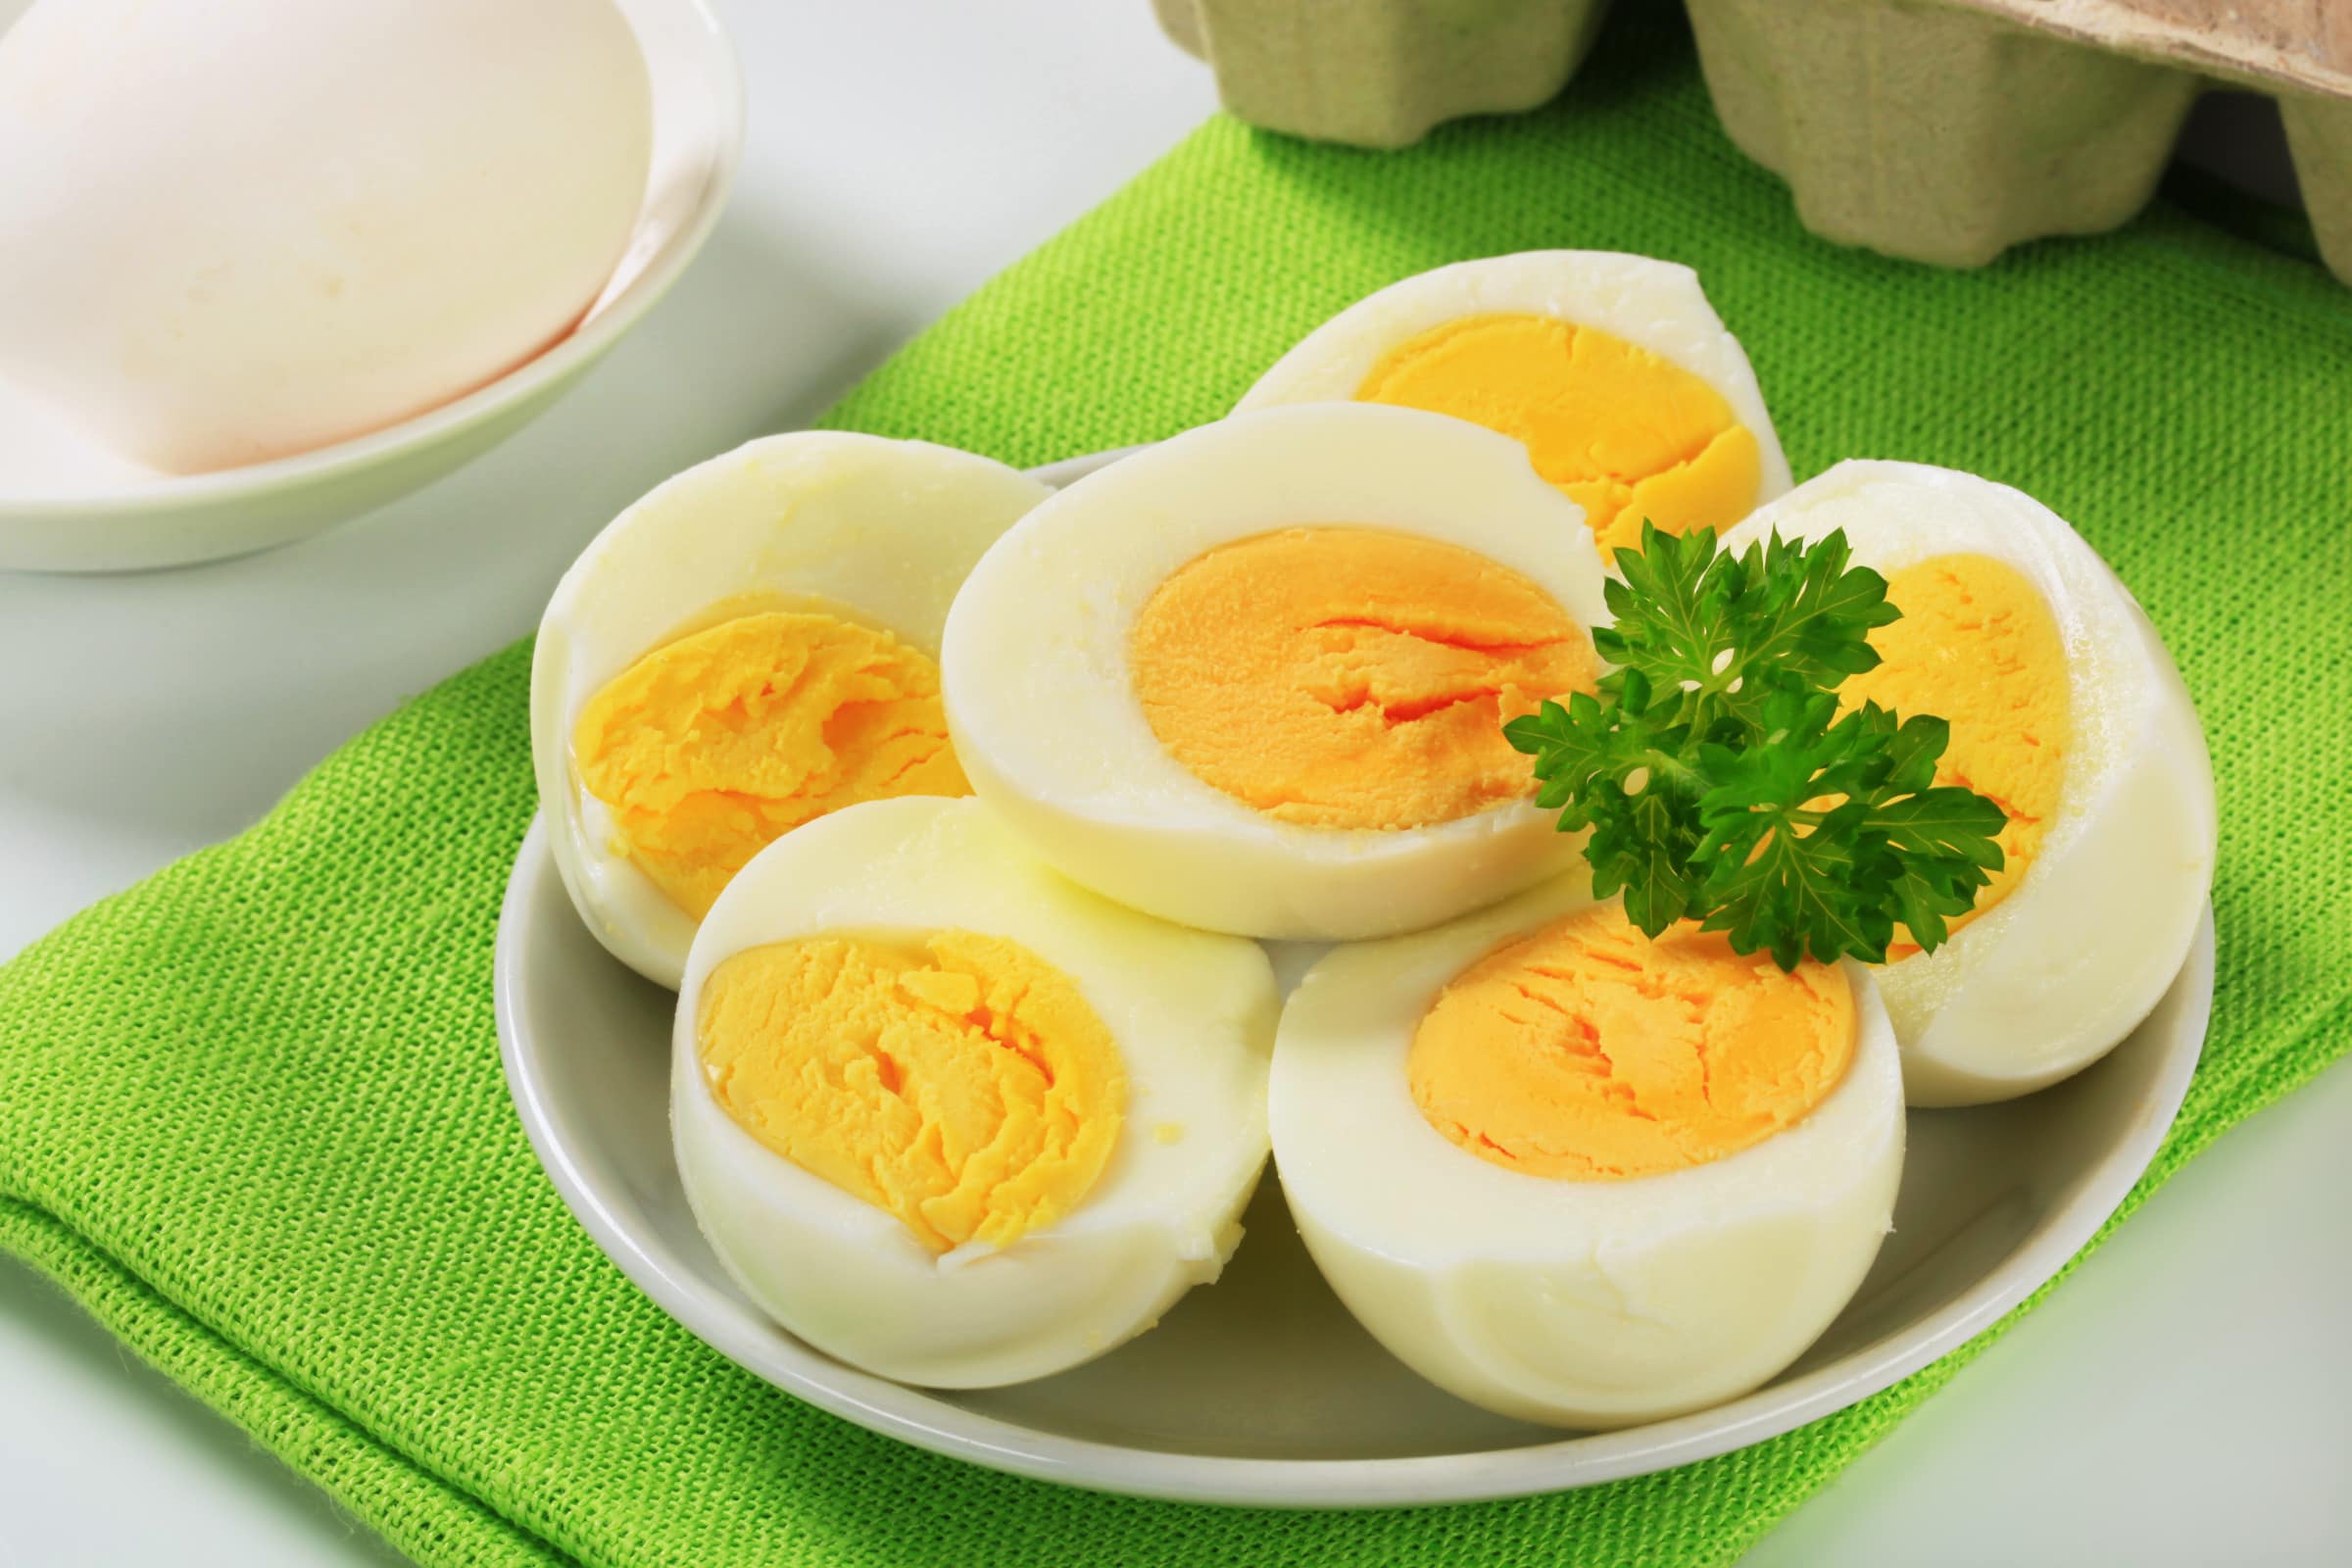  Vegetables High in Protein - eggs